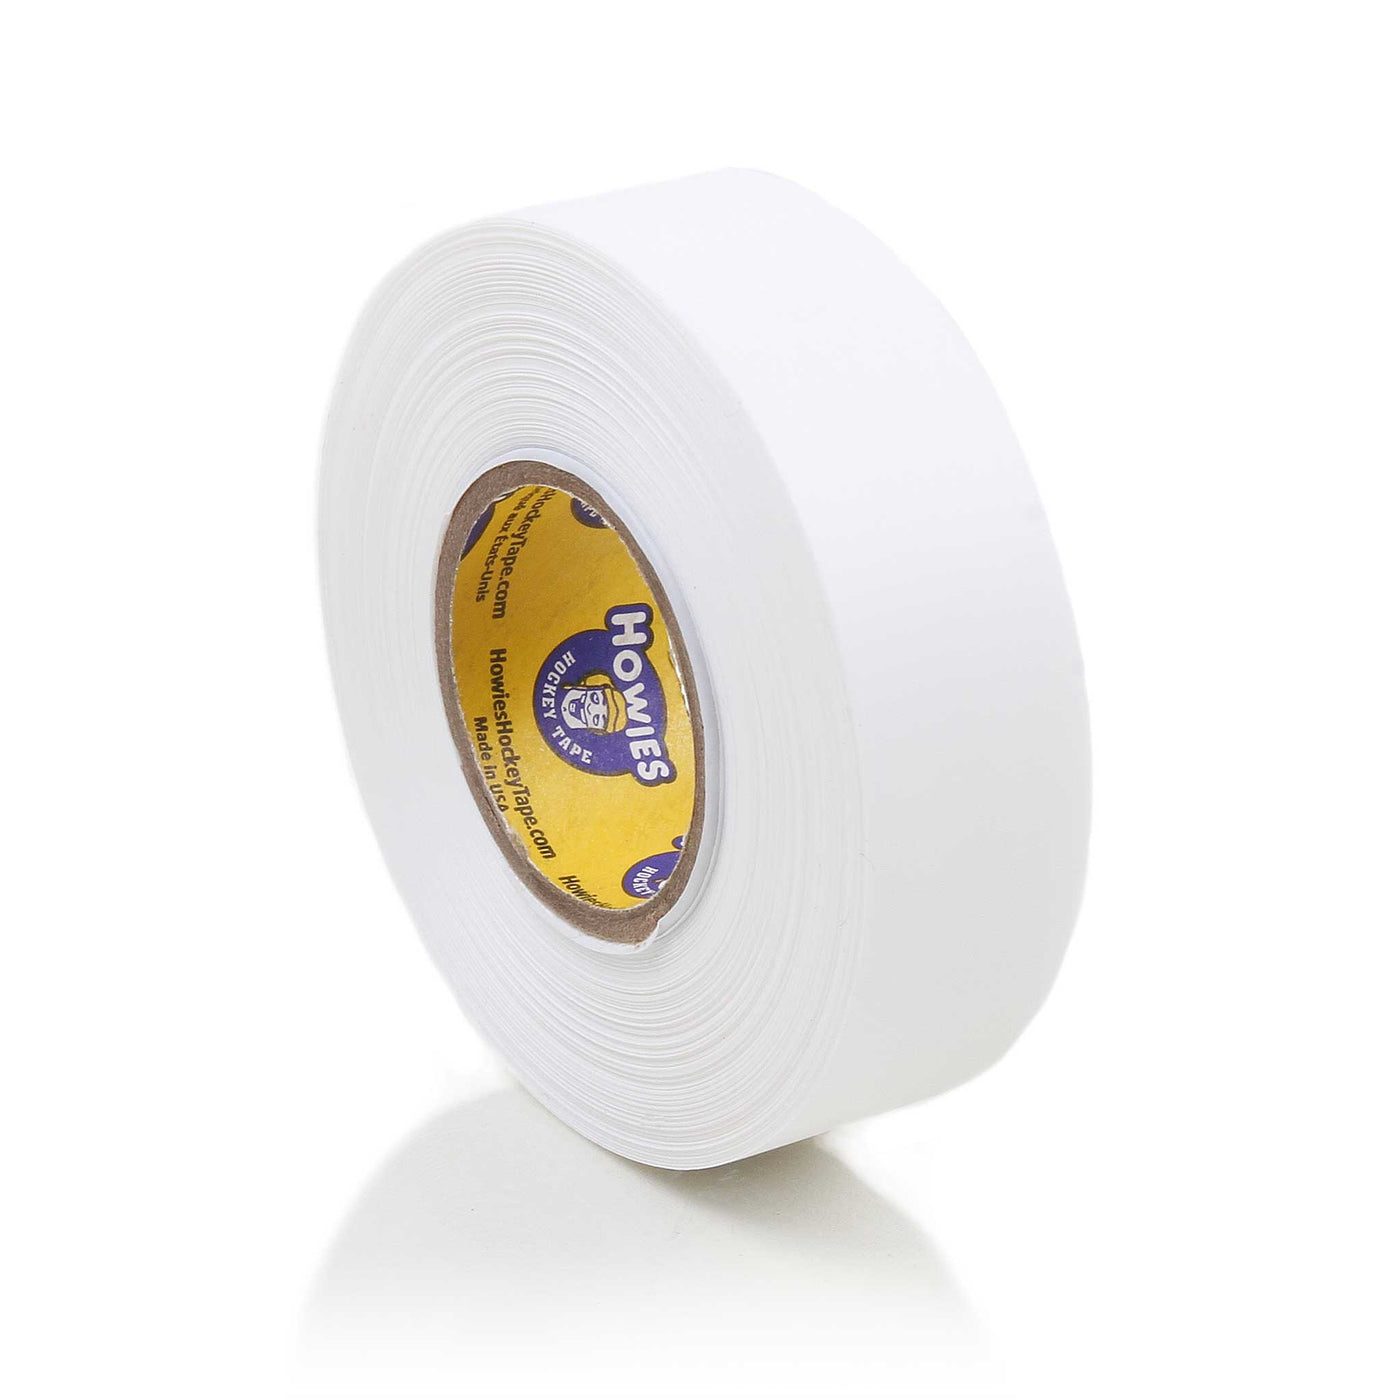 Howies Leg Protection Tape - White